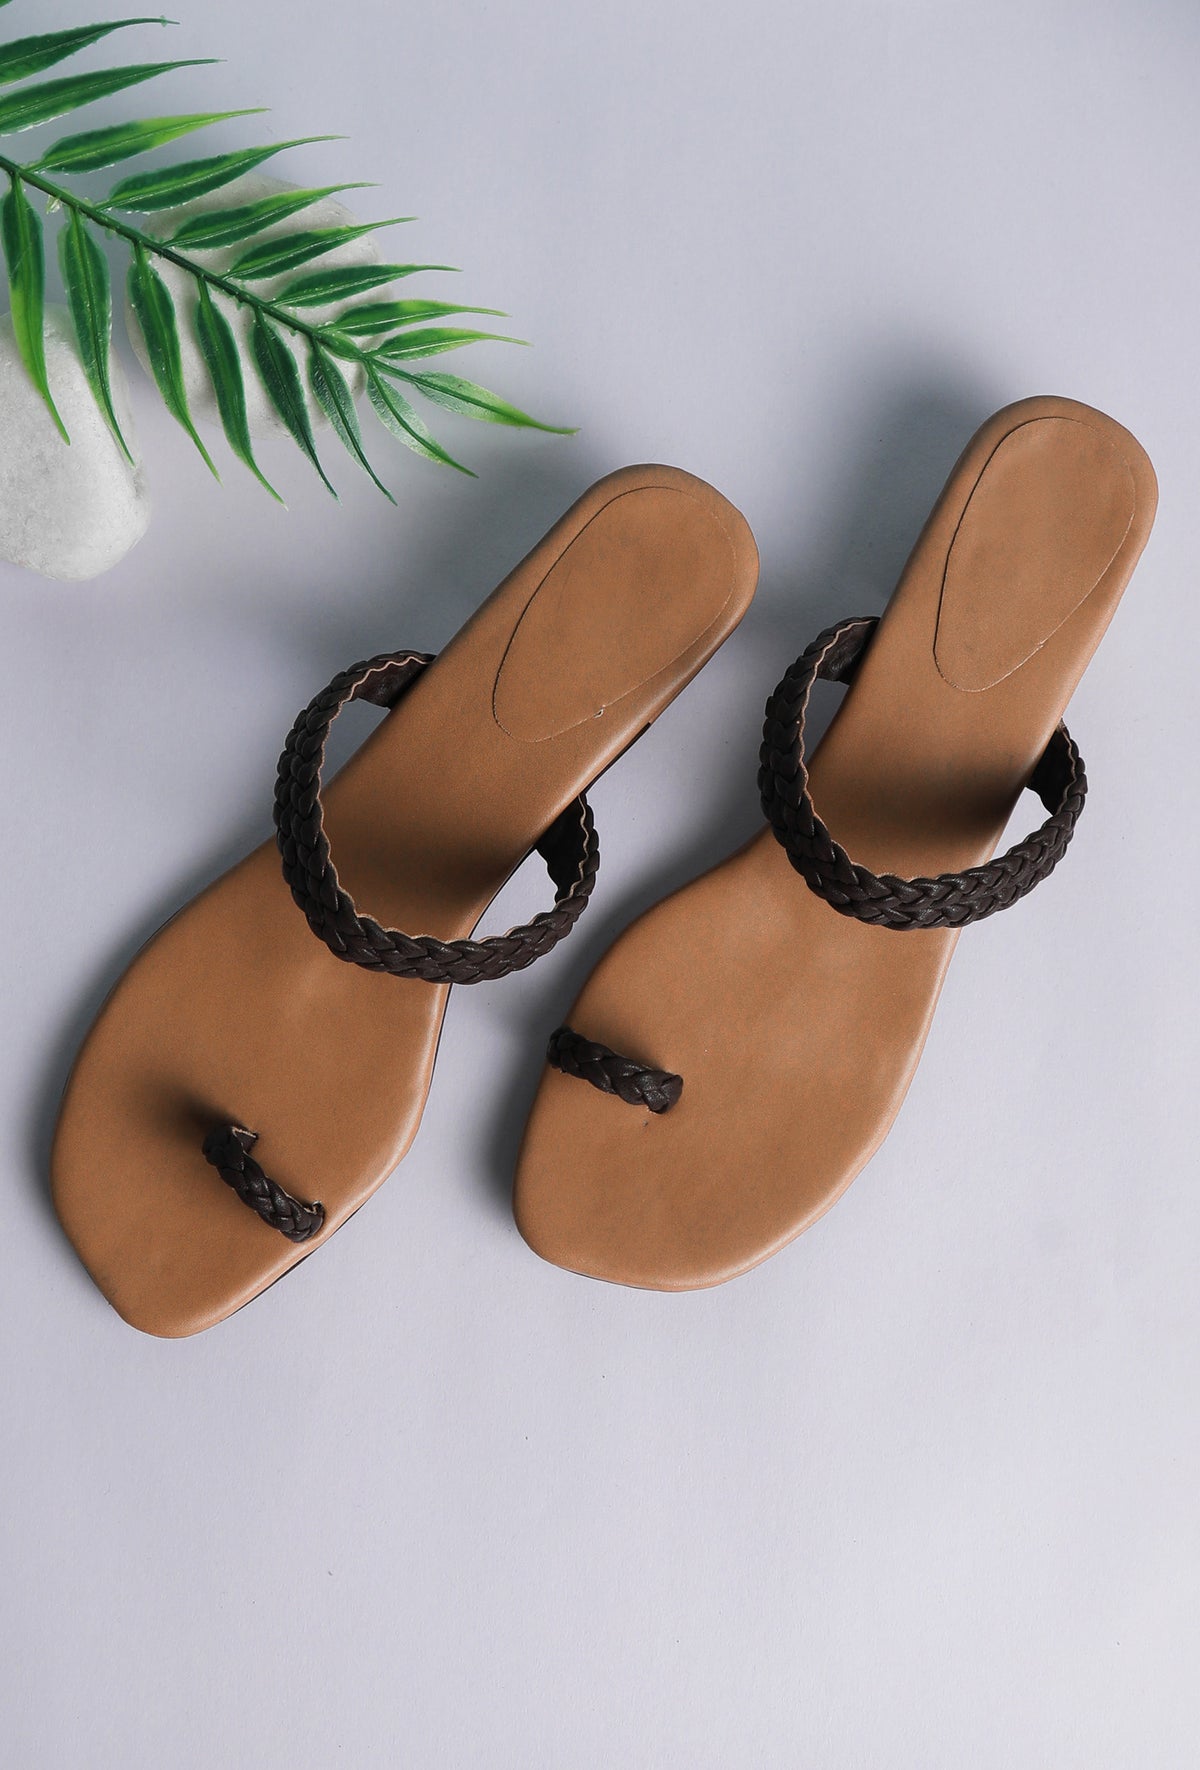 Classic Black Knotted Cruelty Free Leather Sandals